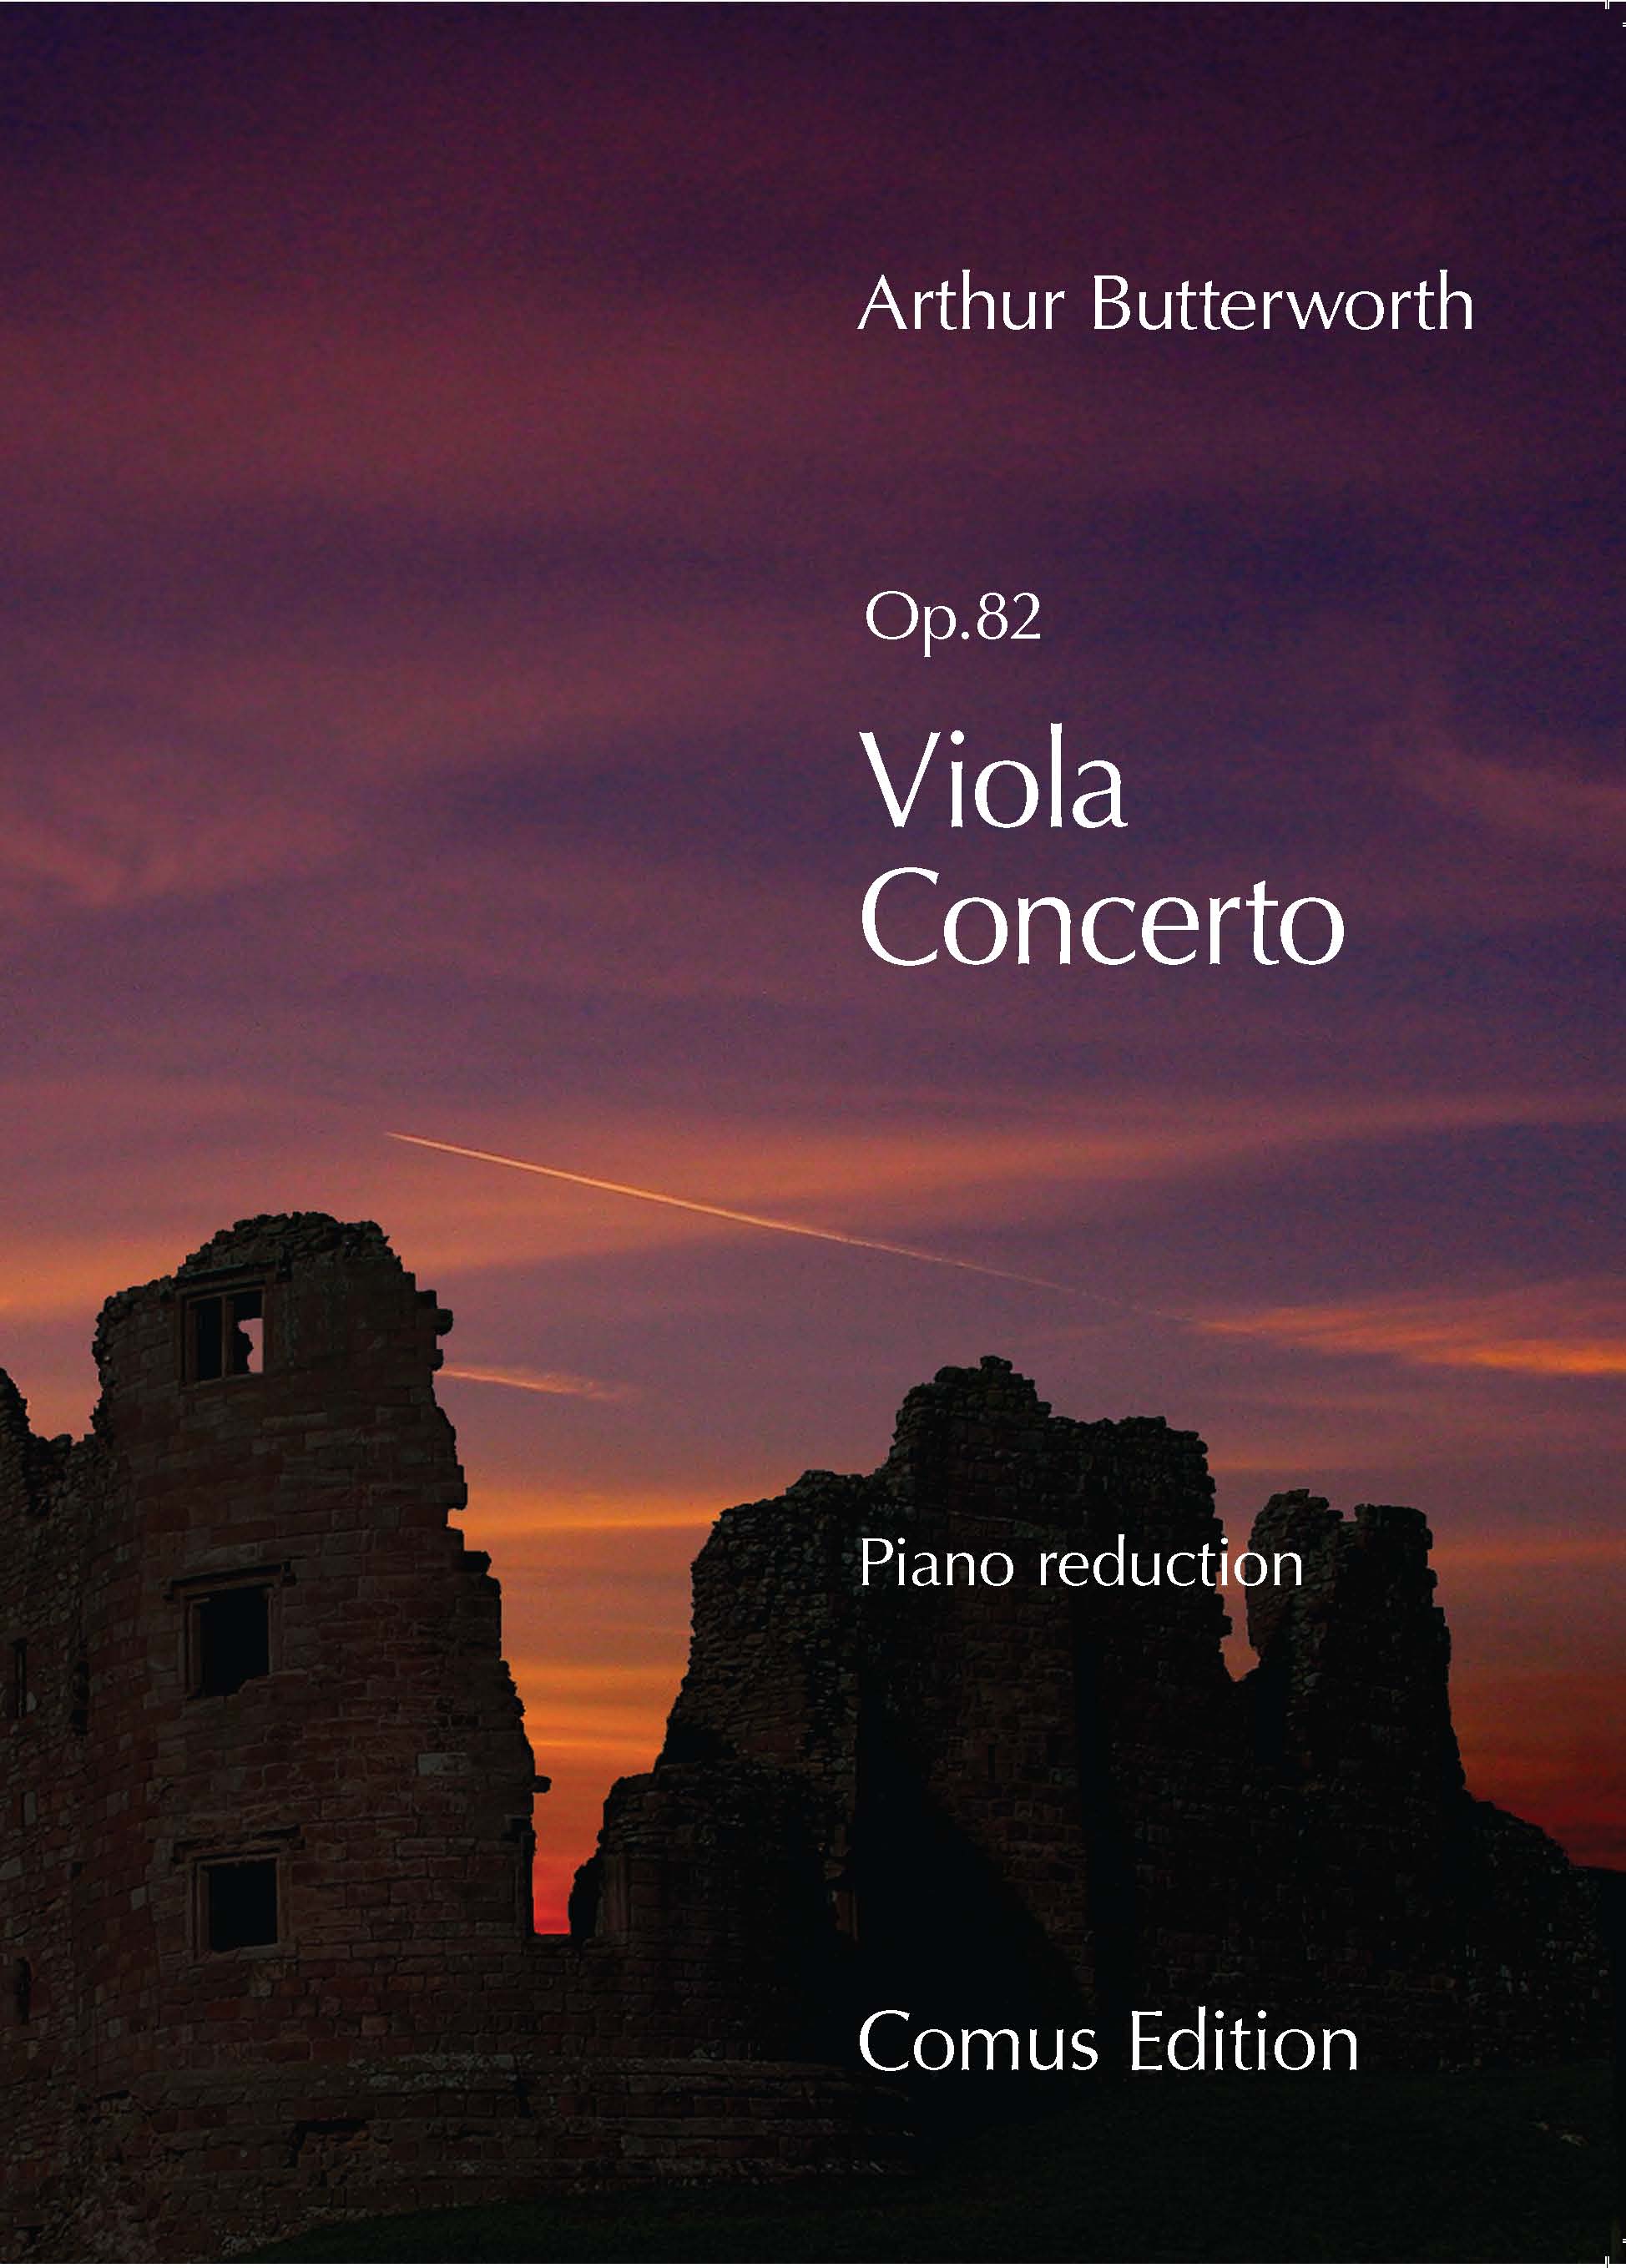 Outer cover of item Viola Concerto, Op.82